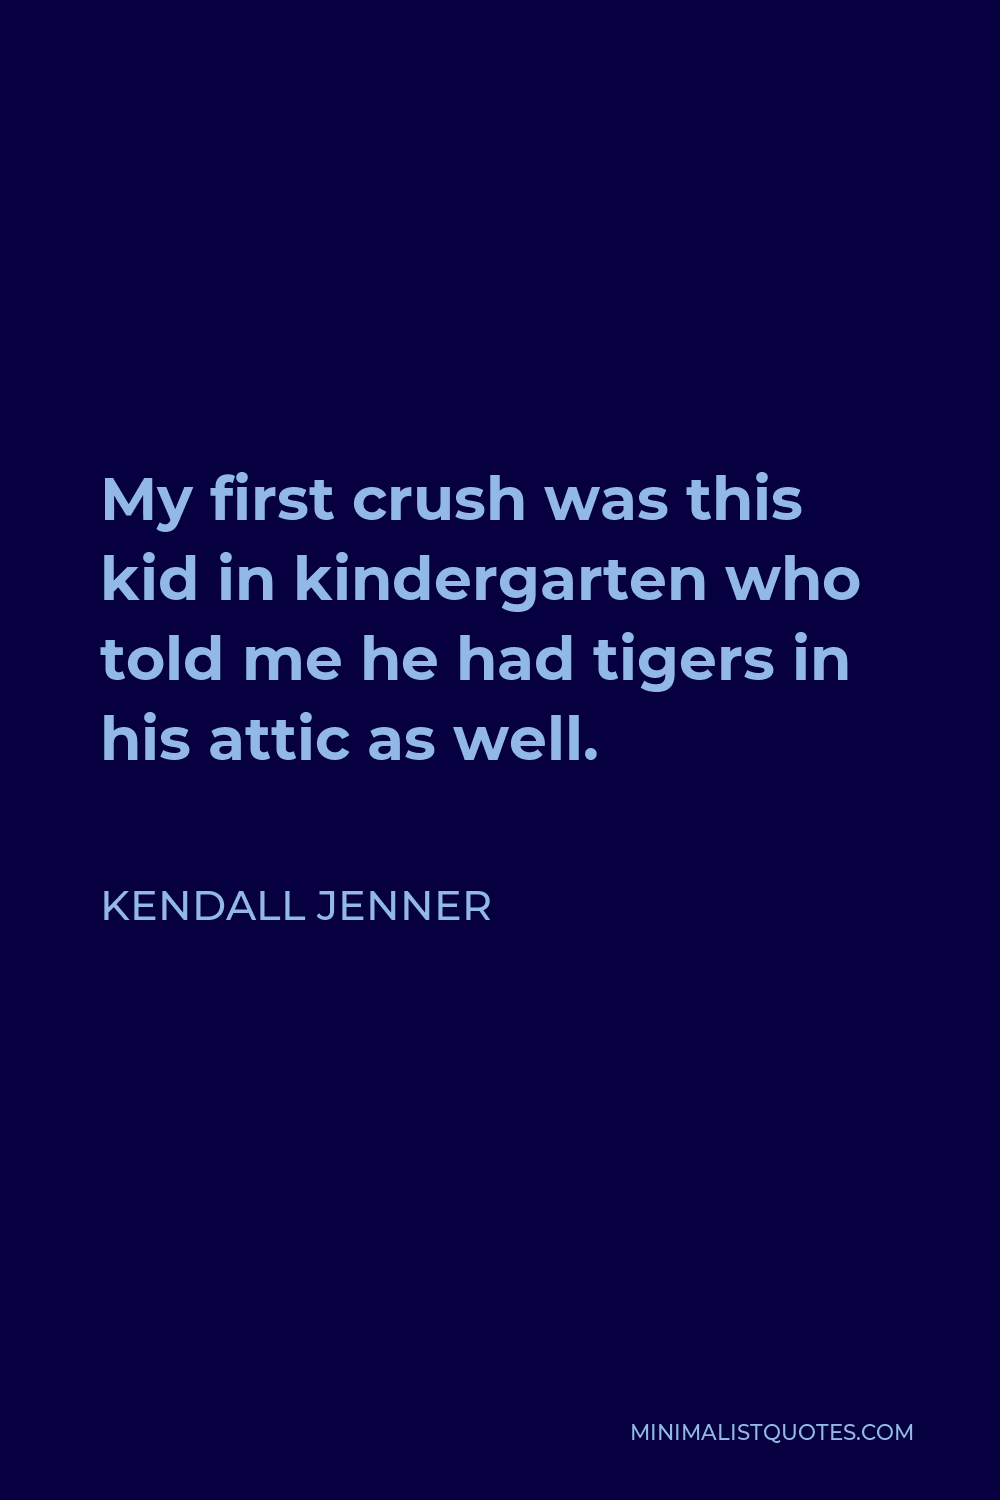 Kendall Jenner Quote - My first crush was this kid in kindergarten who told me he had tigers in his attic as well.